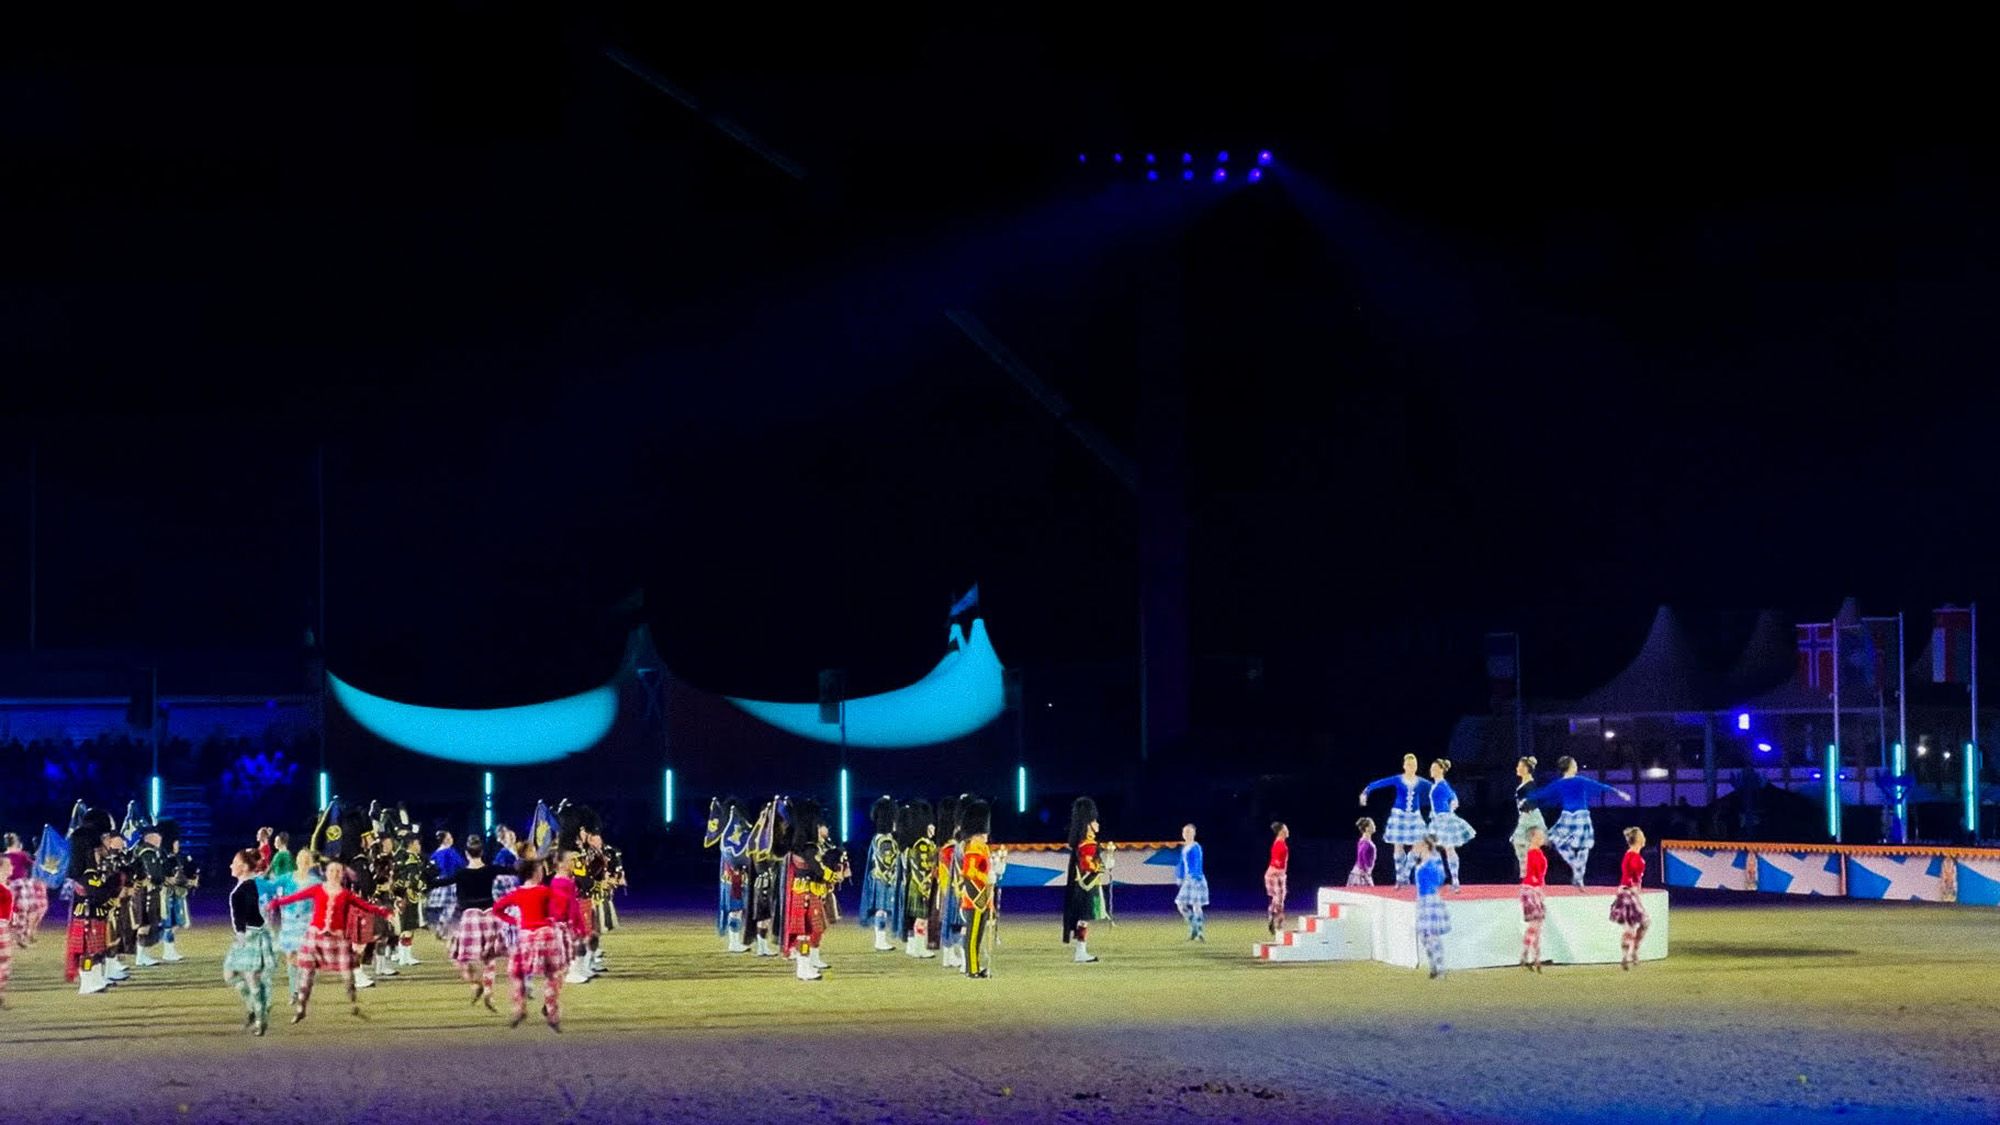 It is dark. At the centre of a large arena, Highland dancers perform a ceilidh. Dressed in blue and red, they dance around a formation of pipers playing the bagpipes. Partially illuminated tents and the crowd can be seen in the background.